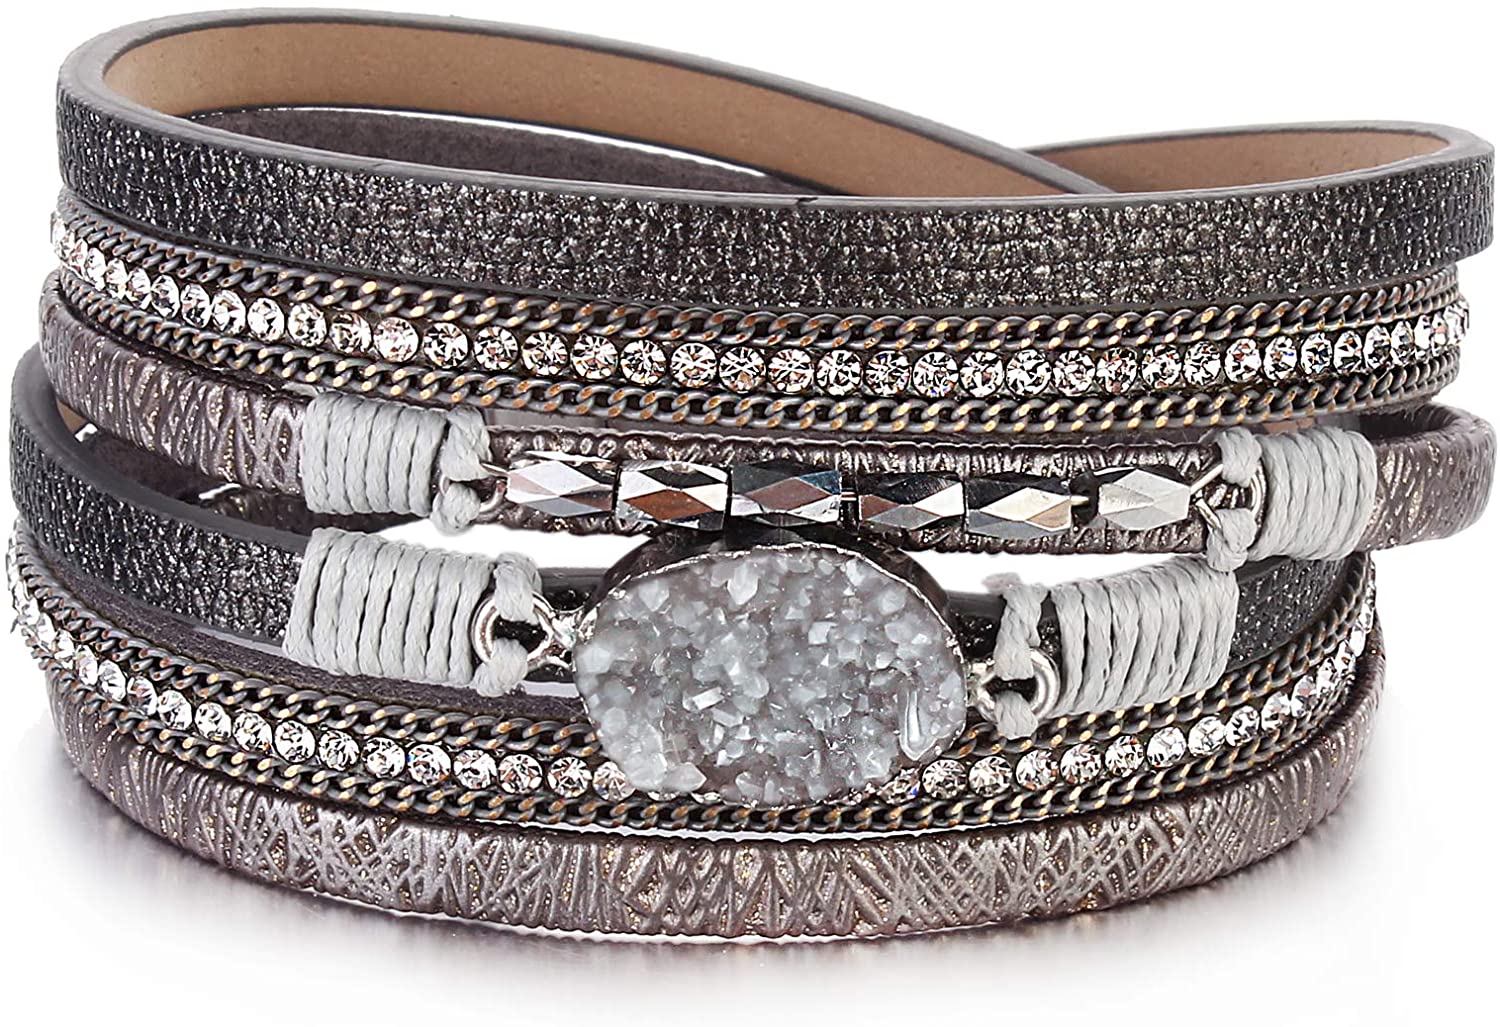 Boho Crystal Bead Leather Wrap Bracelet with Magnetic Clasp for Women